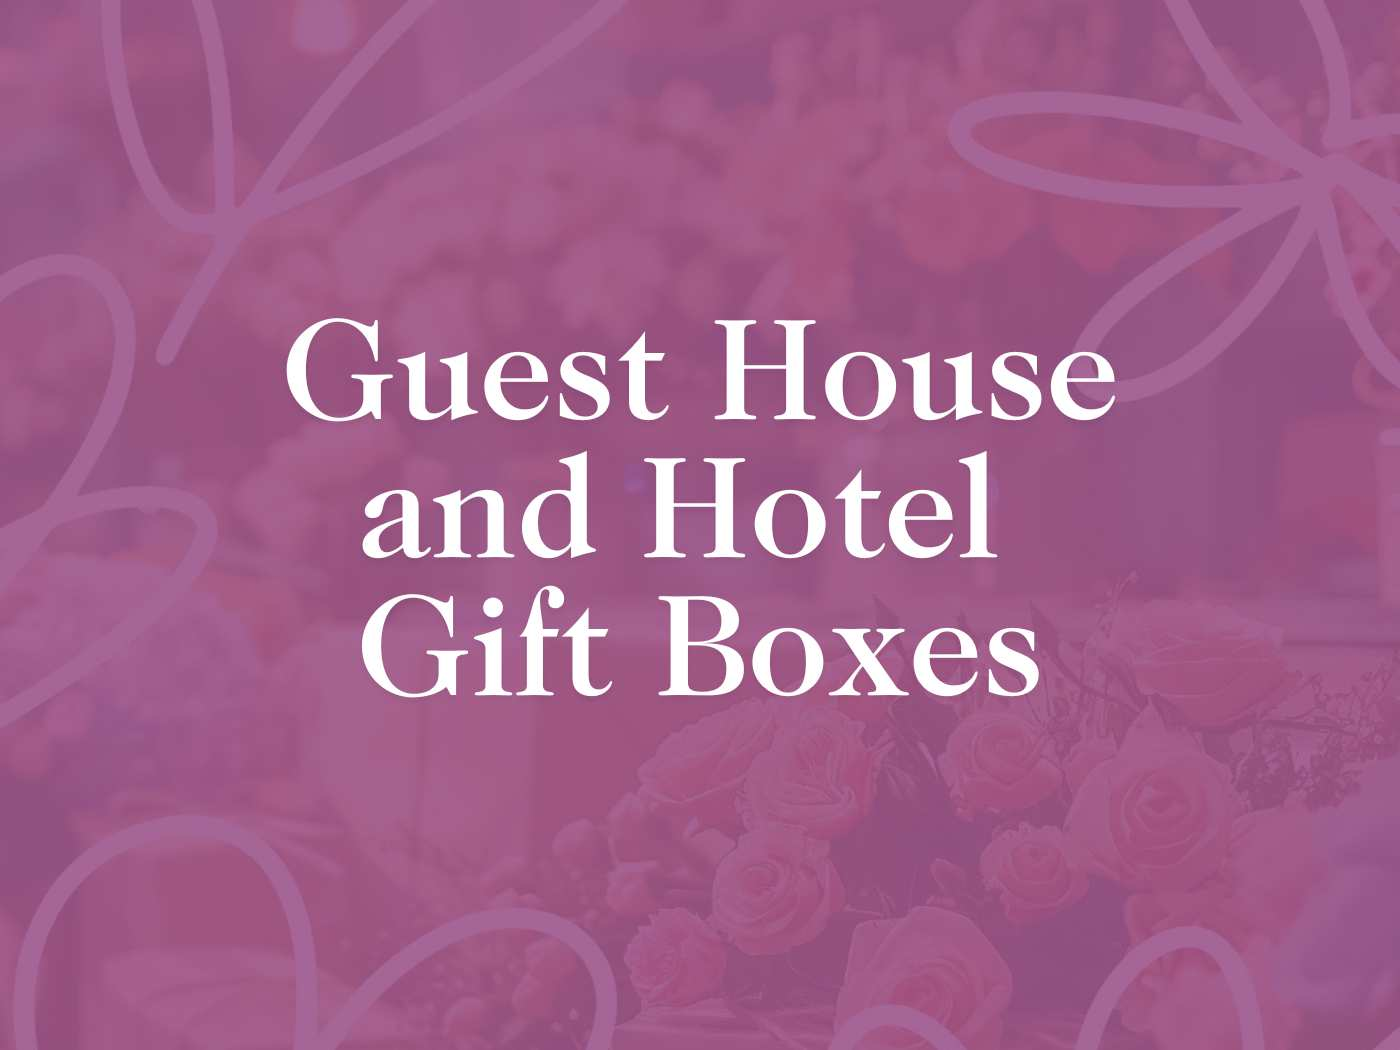 Elegant promotional image with the text 'Guest House and Hotel Gift Boxes' overlaid on a floral background in soft purple tones, symbolizing the quality and care of offerings by Fabulous Flowers and Gifts, tailored for heartfelt deliveries to guest houses and hotels.